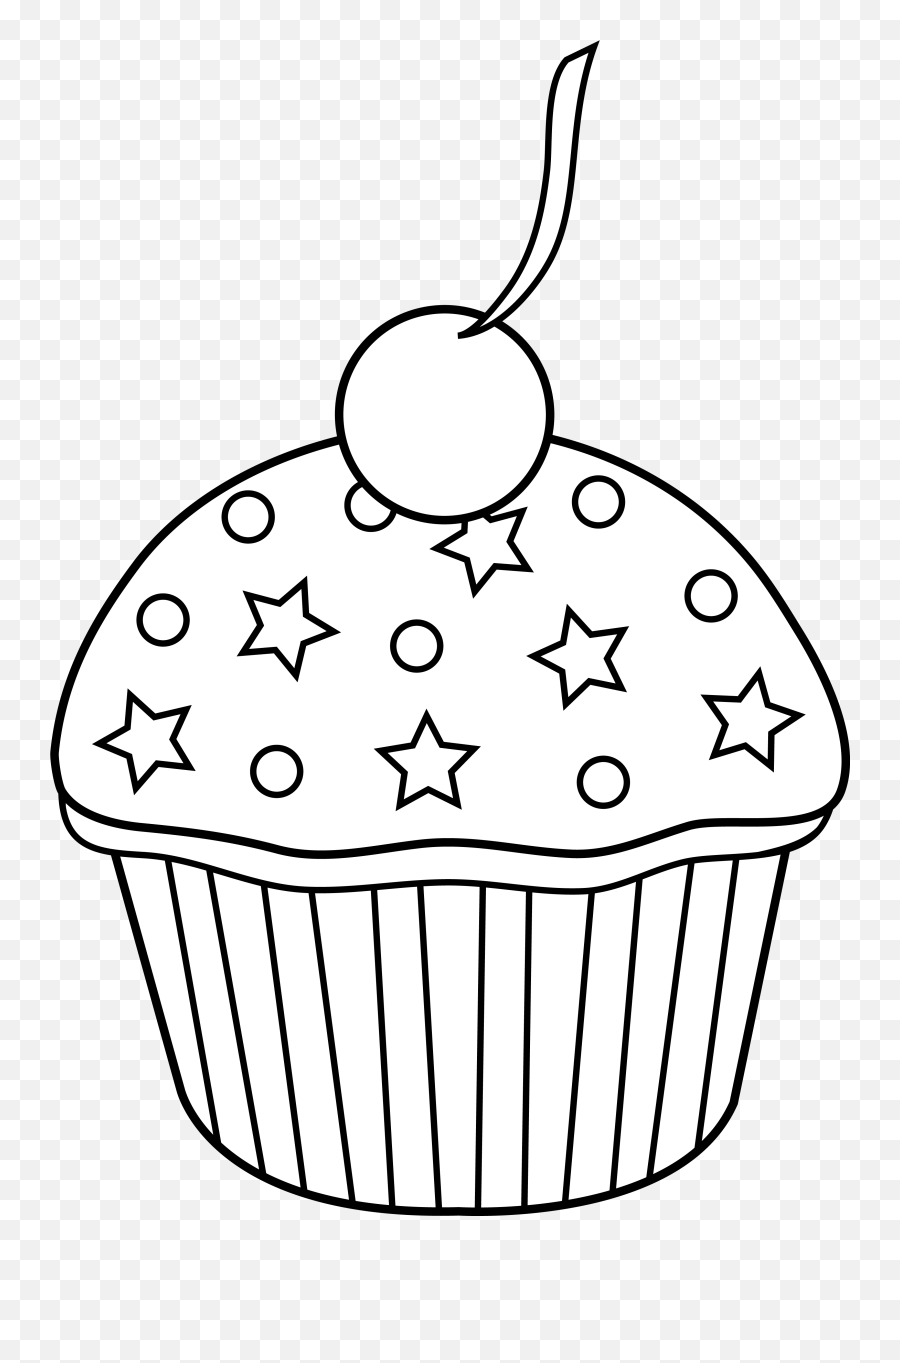 Cupcake Cup Cake Clip Art Art Of White Party Icons App Clip - Cupcakes You Can Color Emoji,Emoji Cake Party